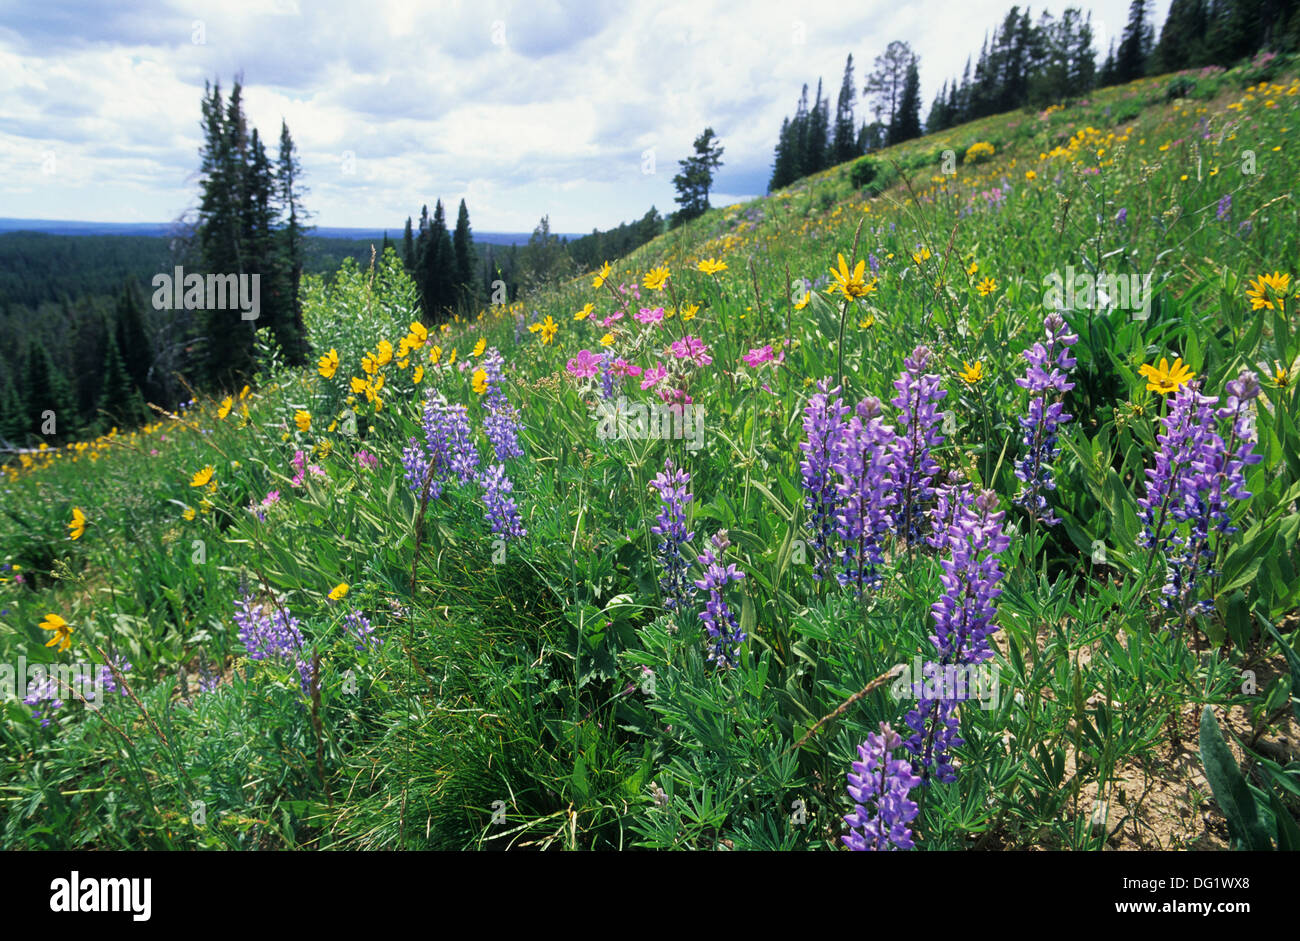 Elk265-1946 Wyoming, Yellowstone National Park, wildflowers, Heartleaf Arnica and Blue Lupine Stock Photo